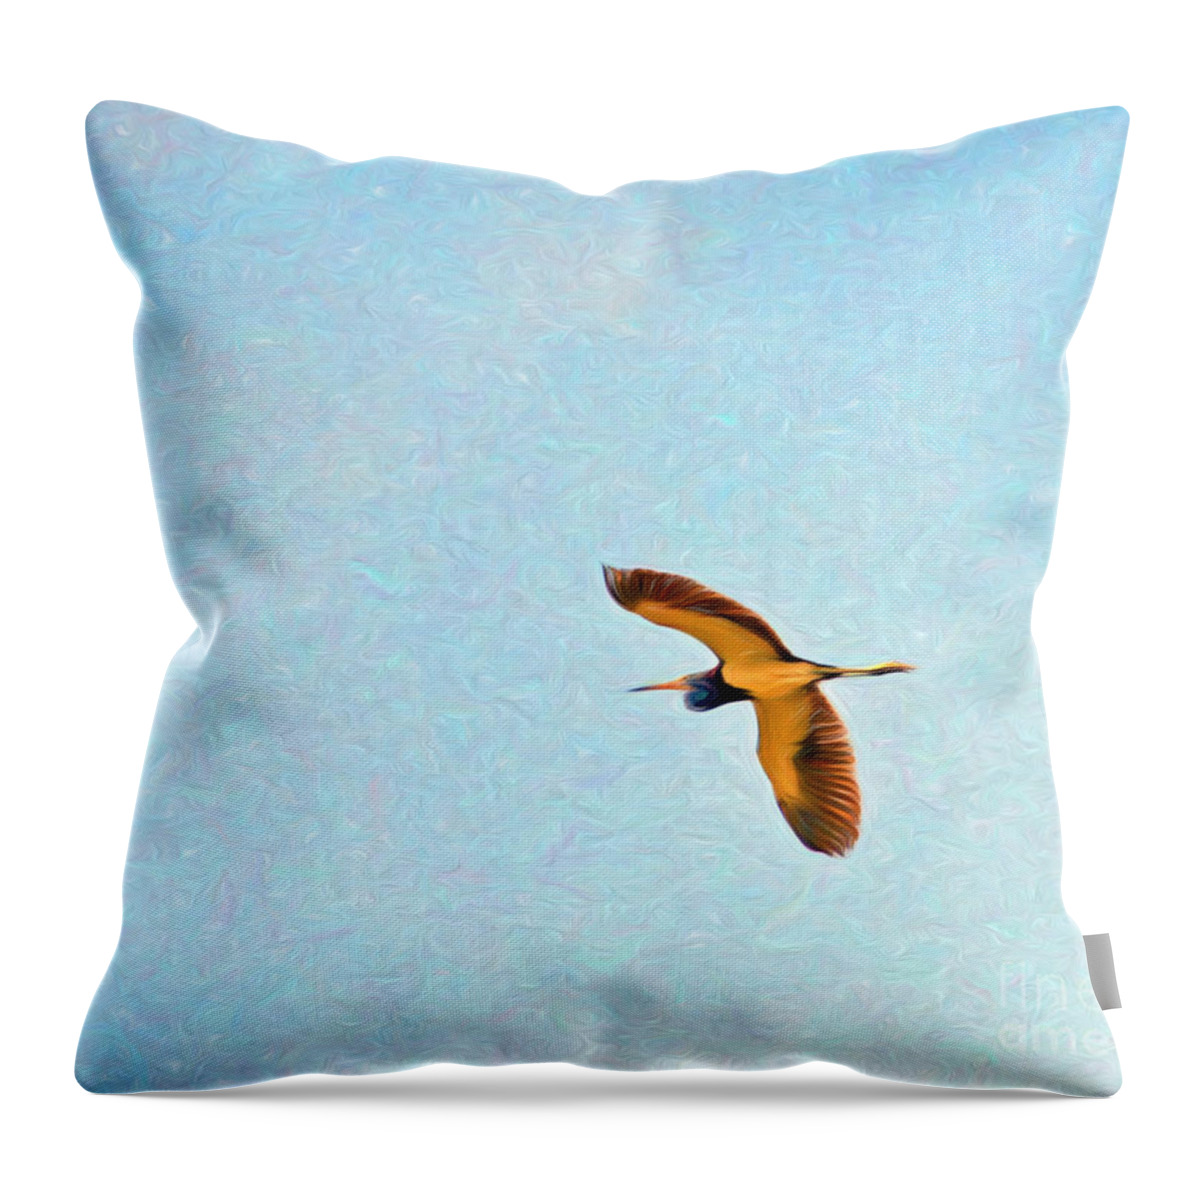 Tricolored Heron Throw Pillow featuring the photograph Tricolored Heron Flight by Kerri Farley